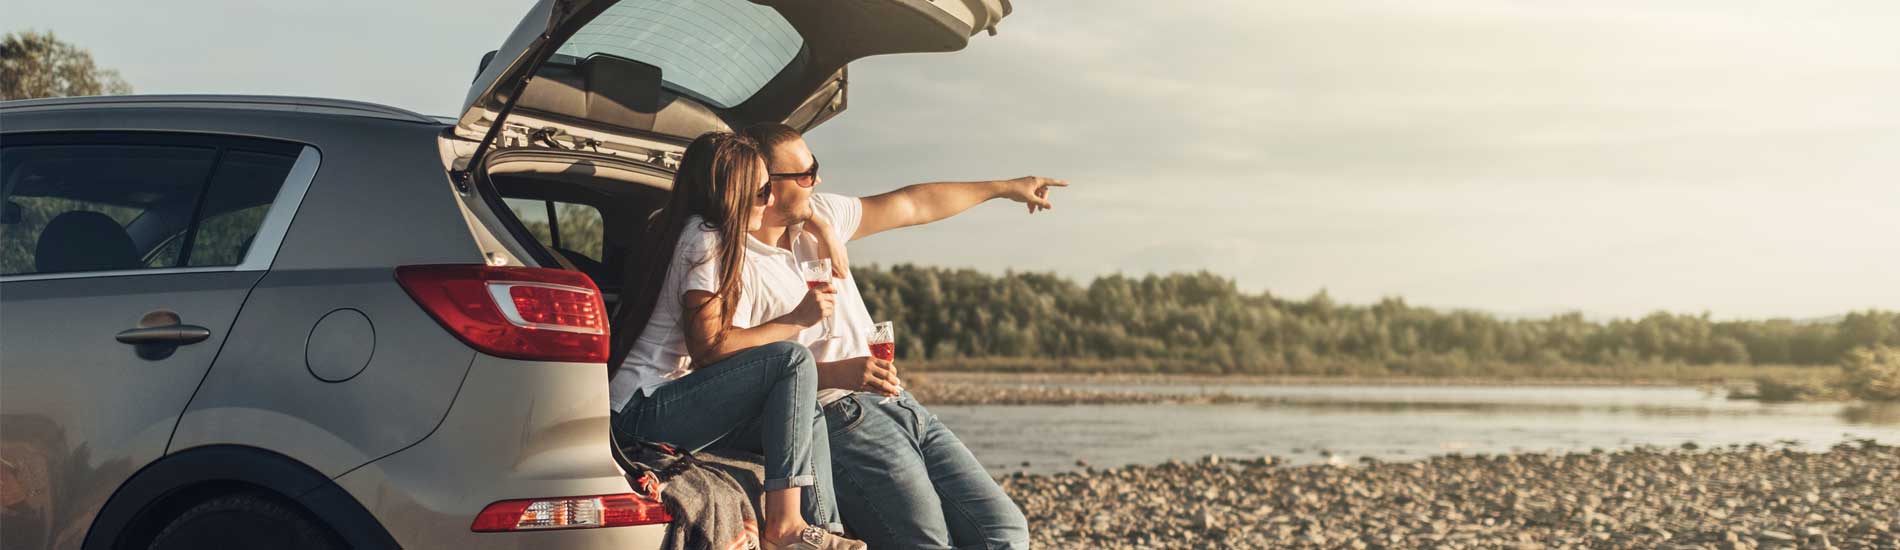 6 ways you can budget towards buying a new car in 2019